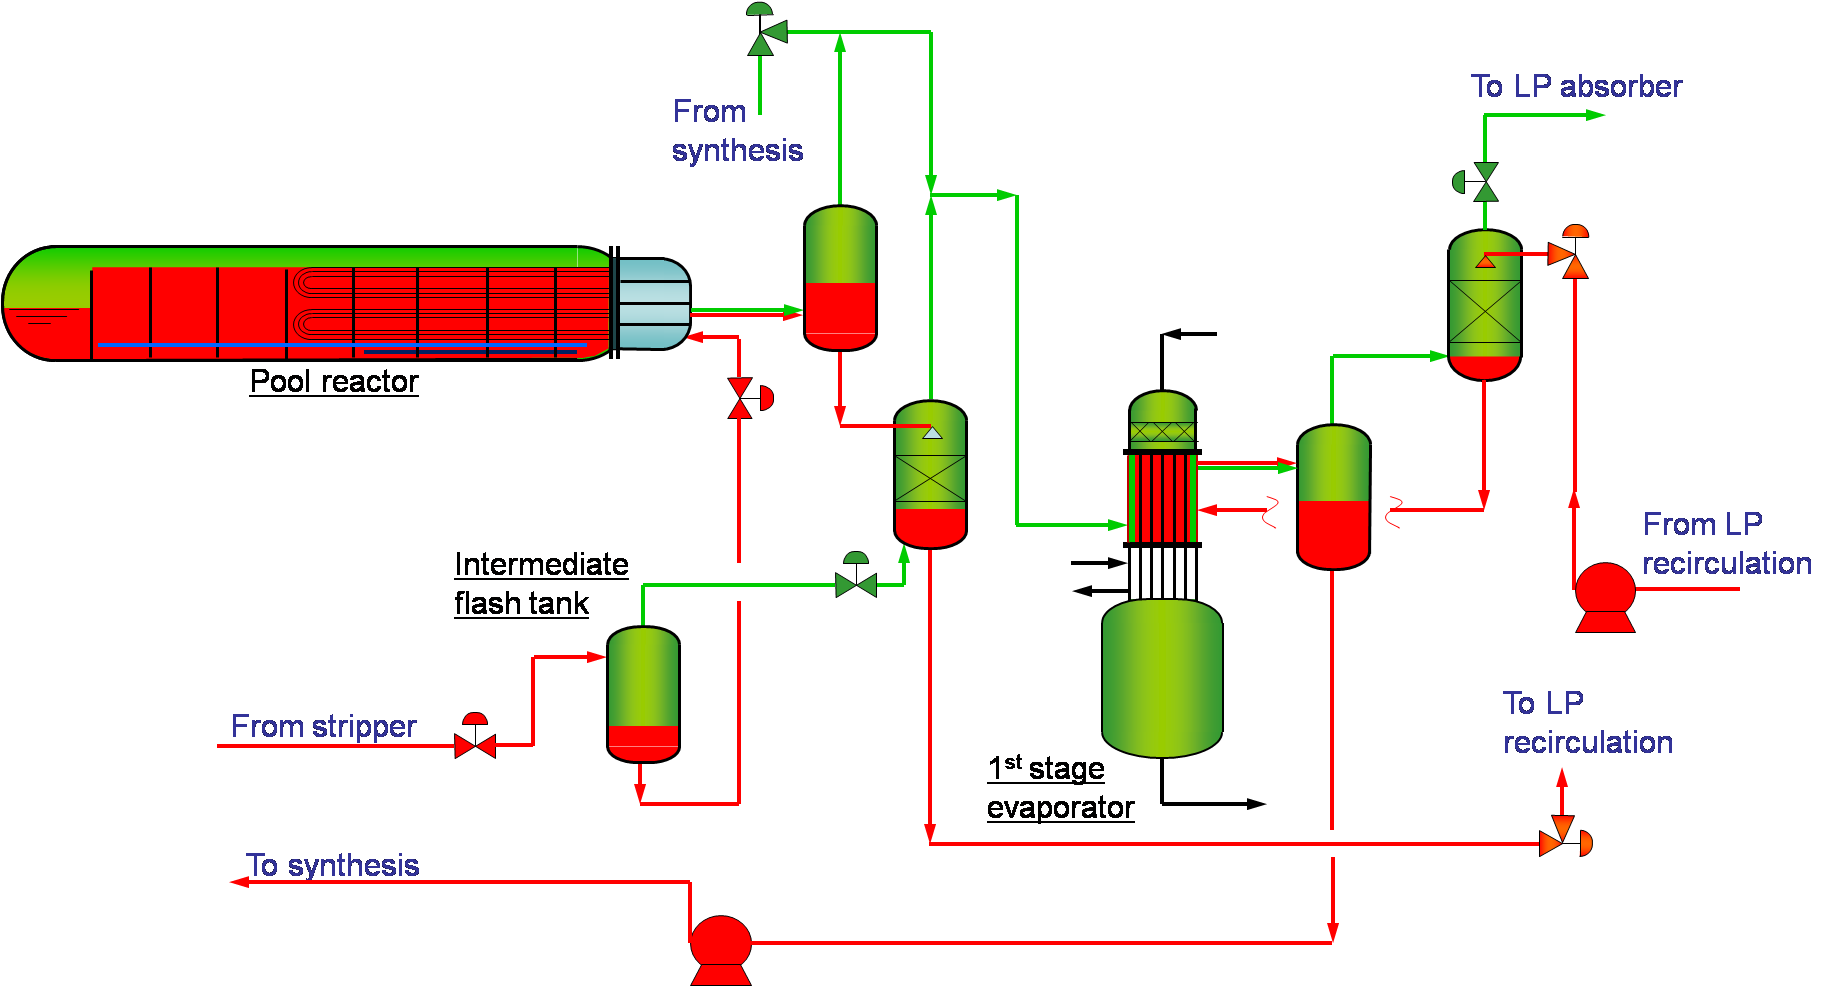 Process diagram of the ULE technology